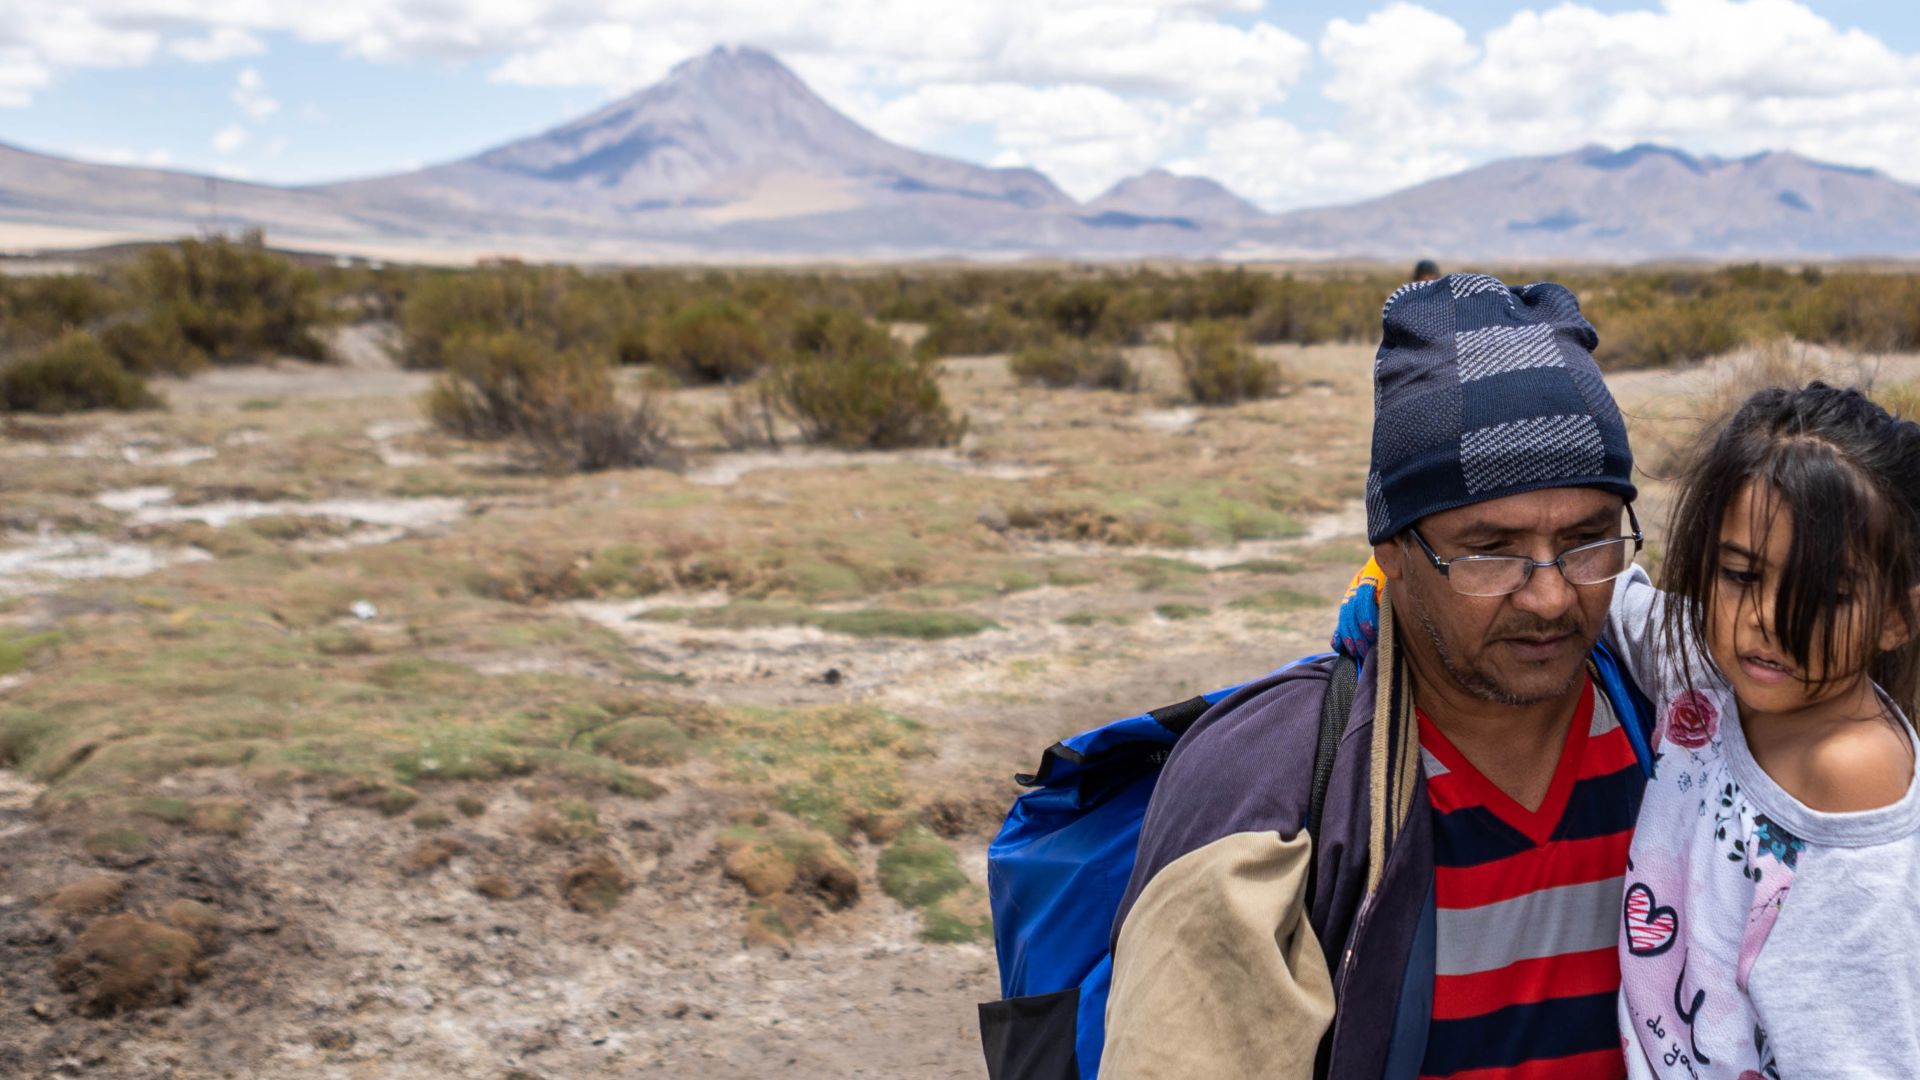 A man carries a 5-year-old girl, Allyson, across the Altiplano highlands.